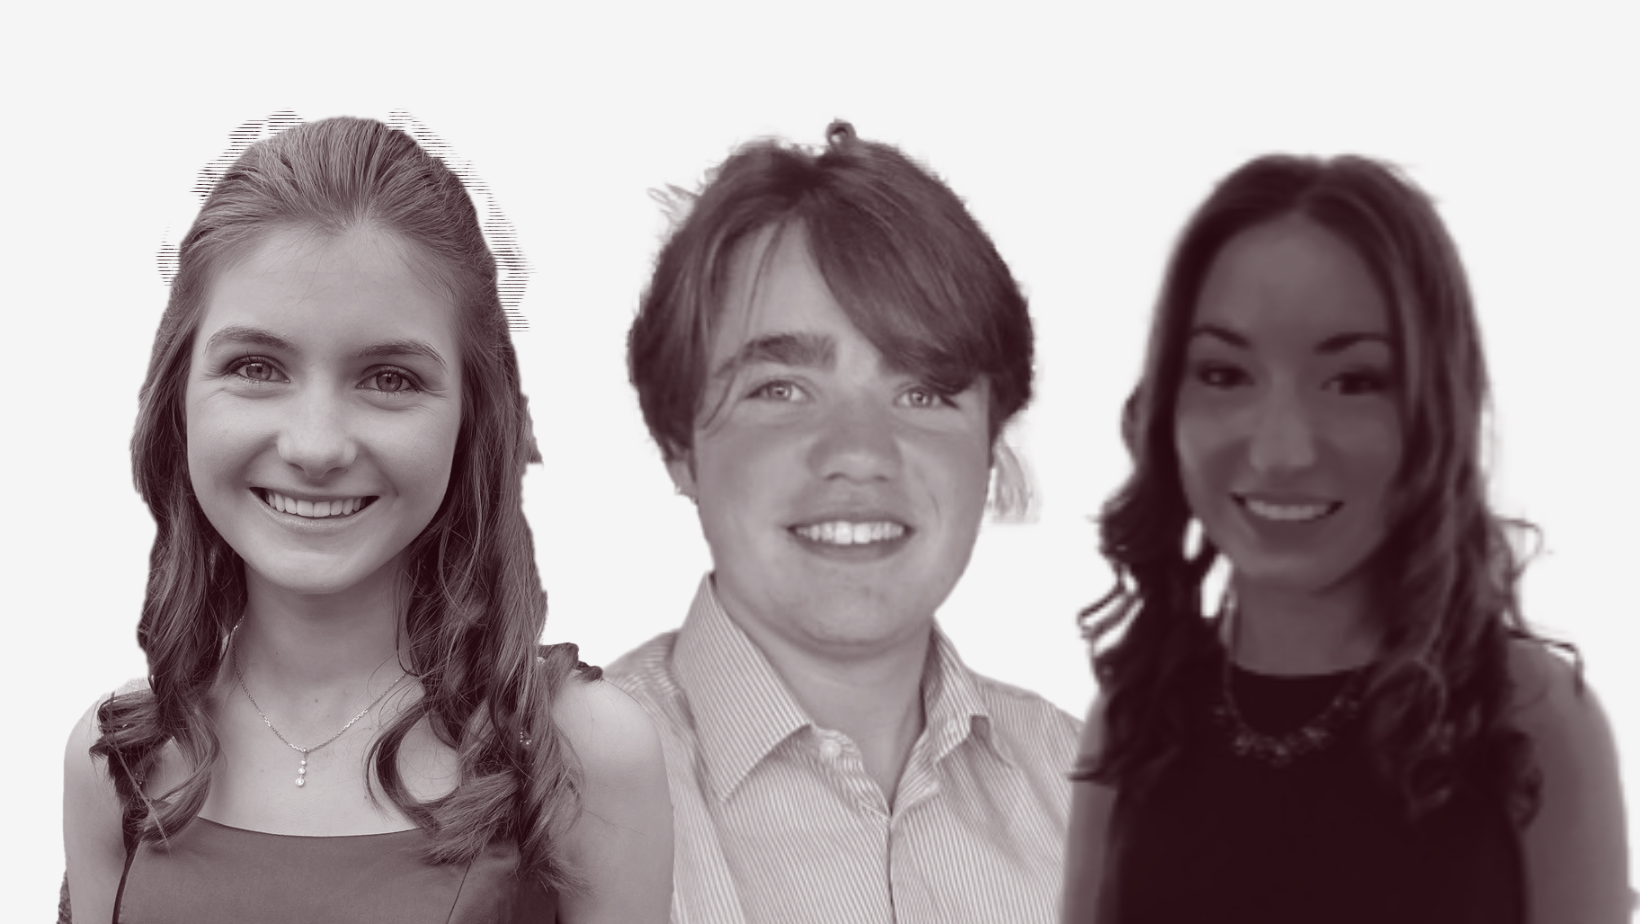 Young Ambassadors Kate, Monty and Rachel - a black and white photo montage using head and shoulder shots